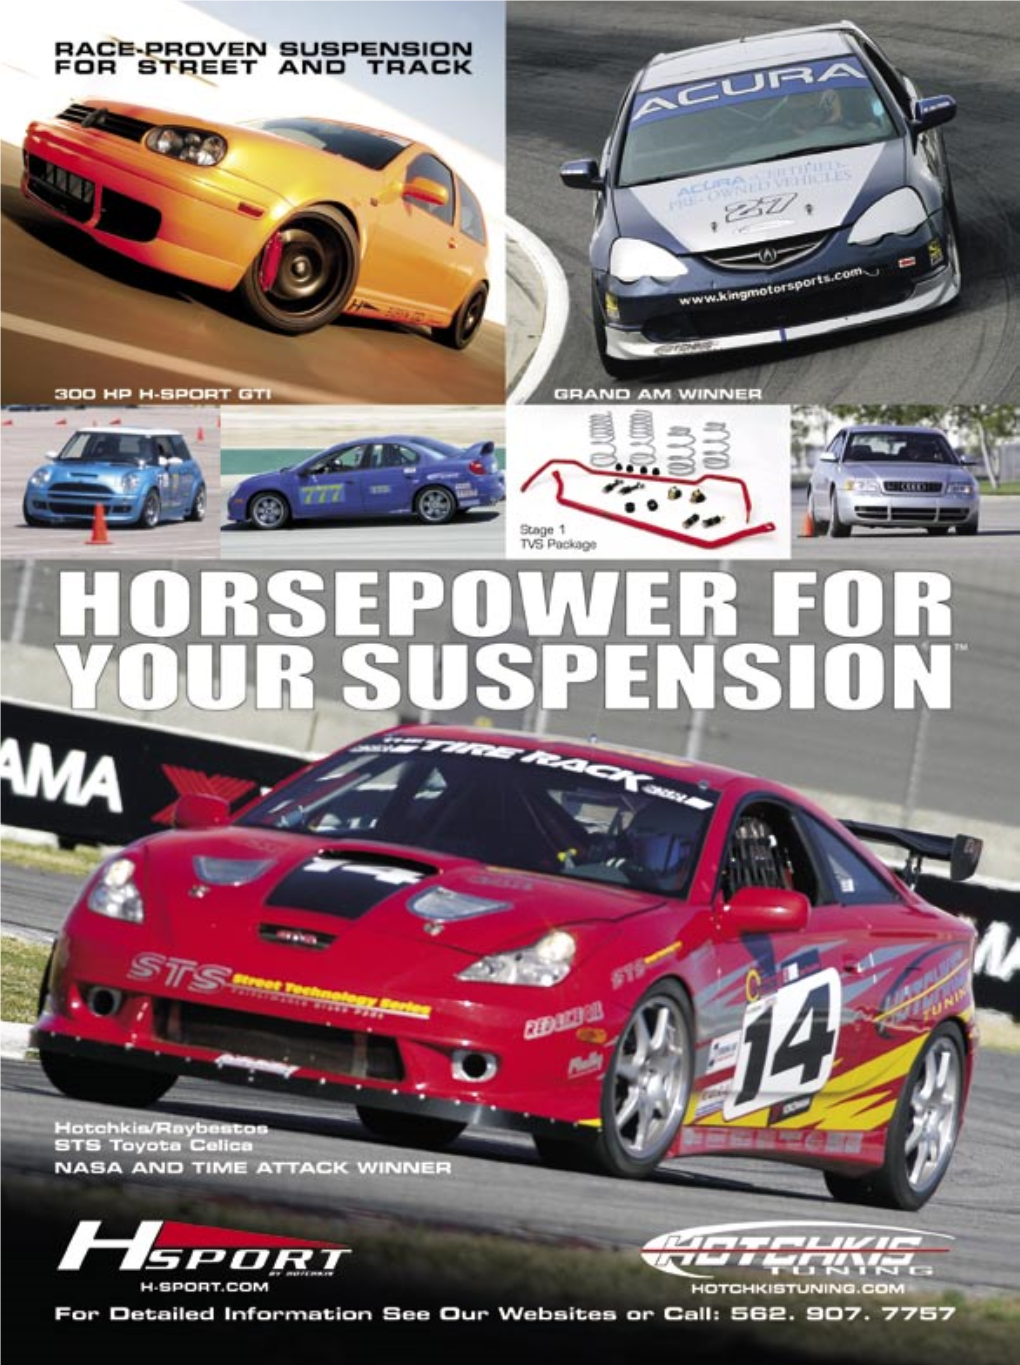 Grassroots Motorsports 100 This Article Reprinted from the August 2005 Issue of Grassroots Motorsports Magazine